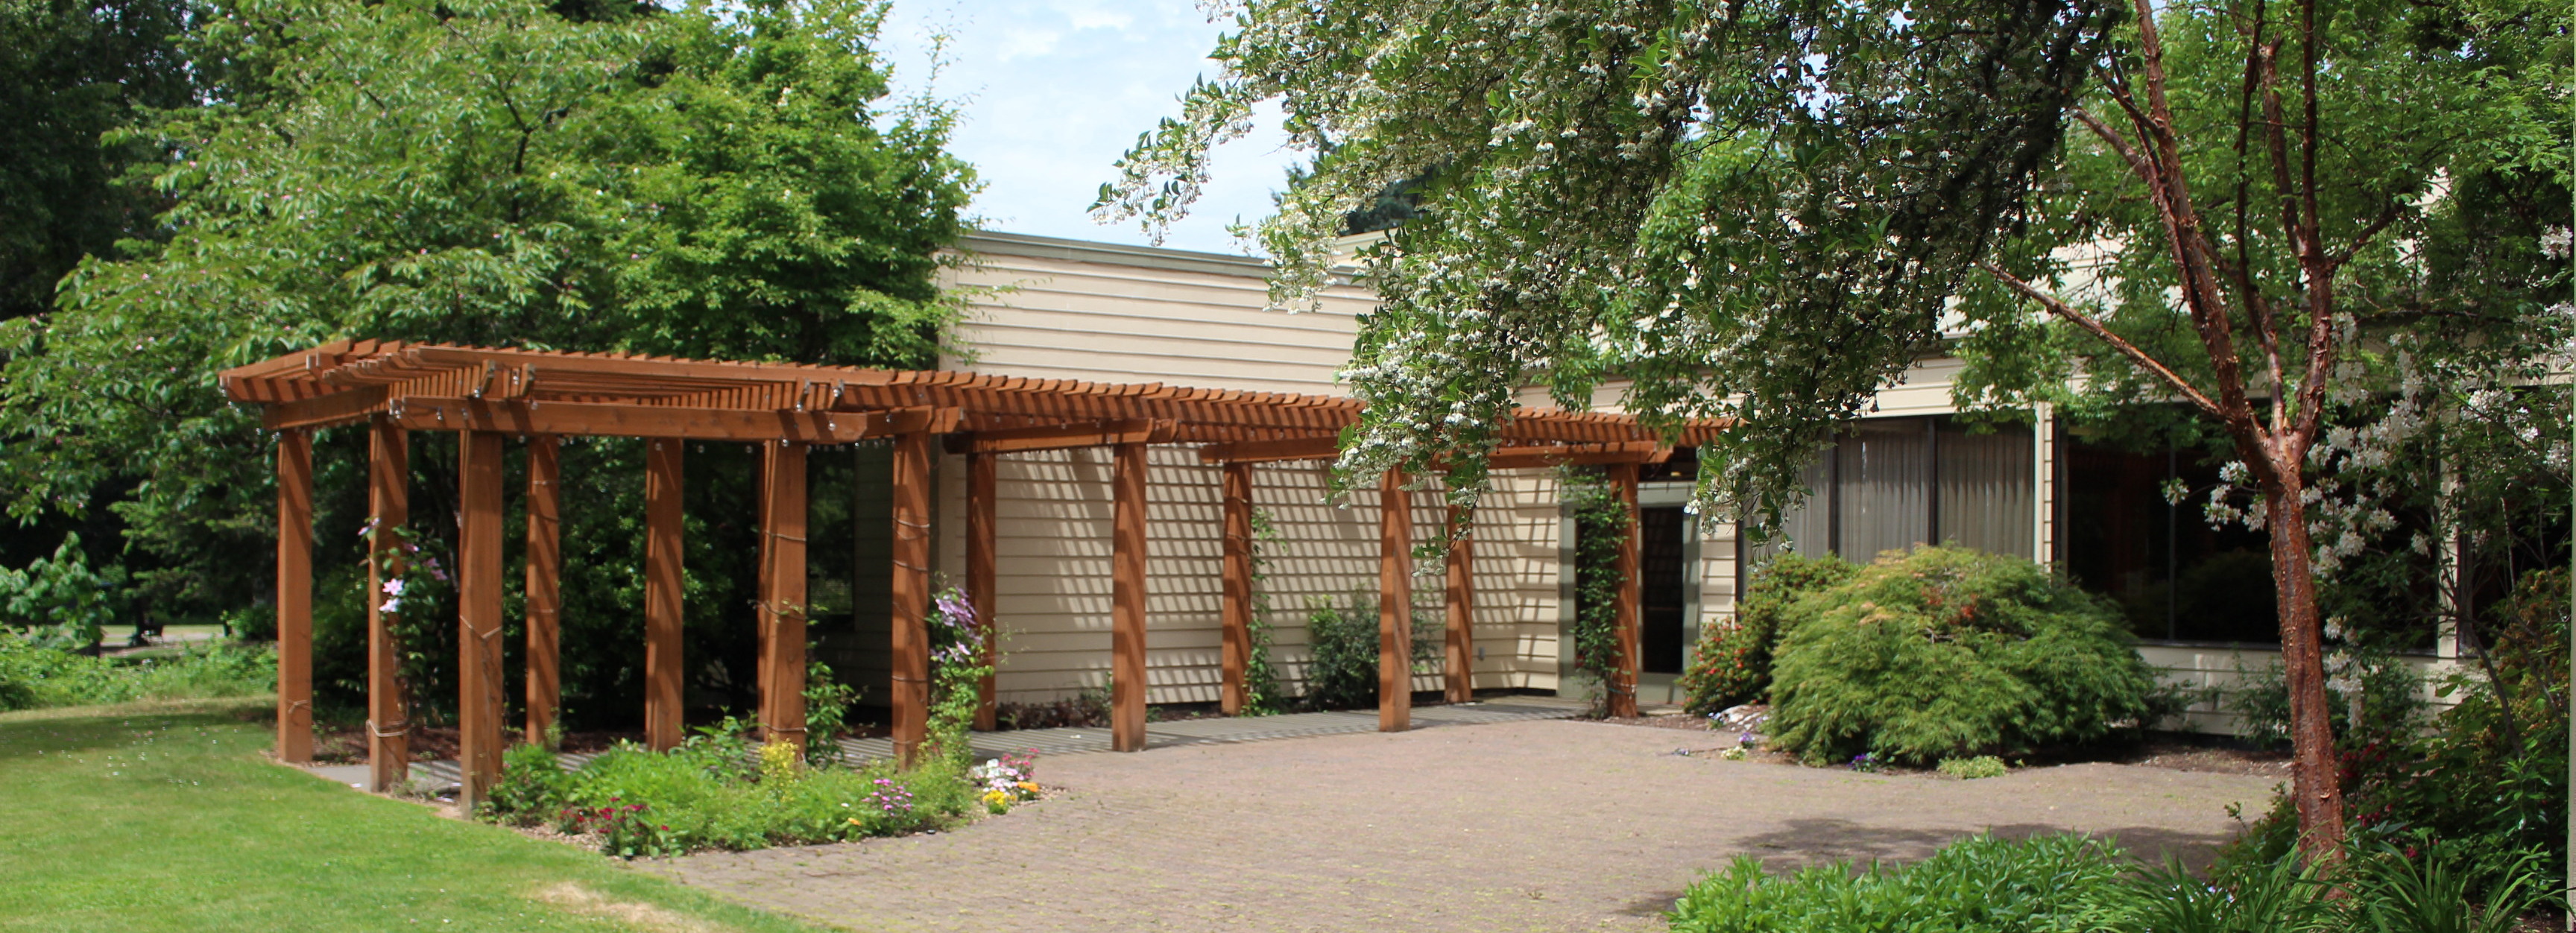 An outdoor patio with a wooden pergola and blooming trees with vast open space available for events